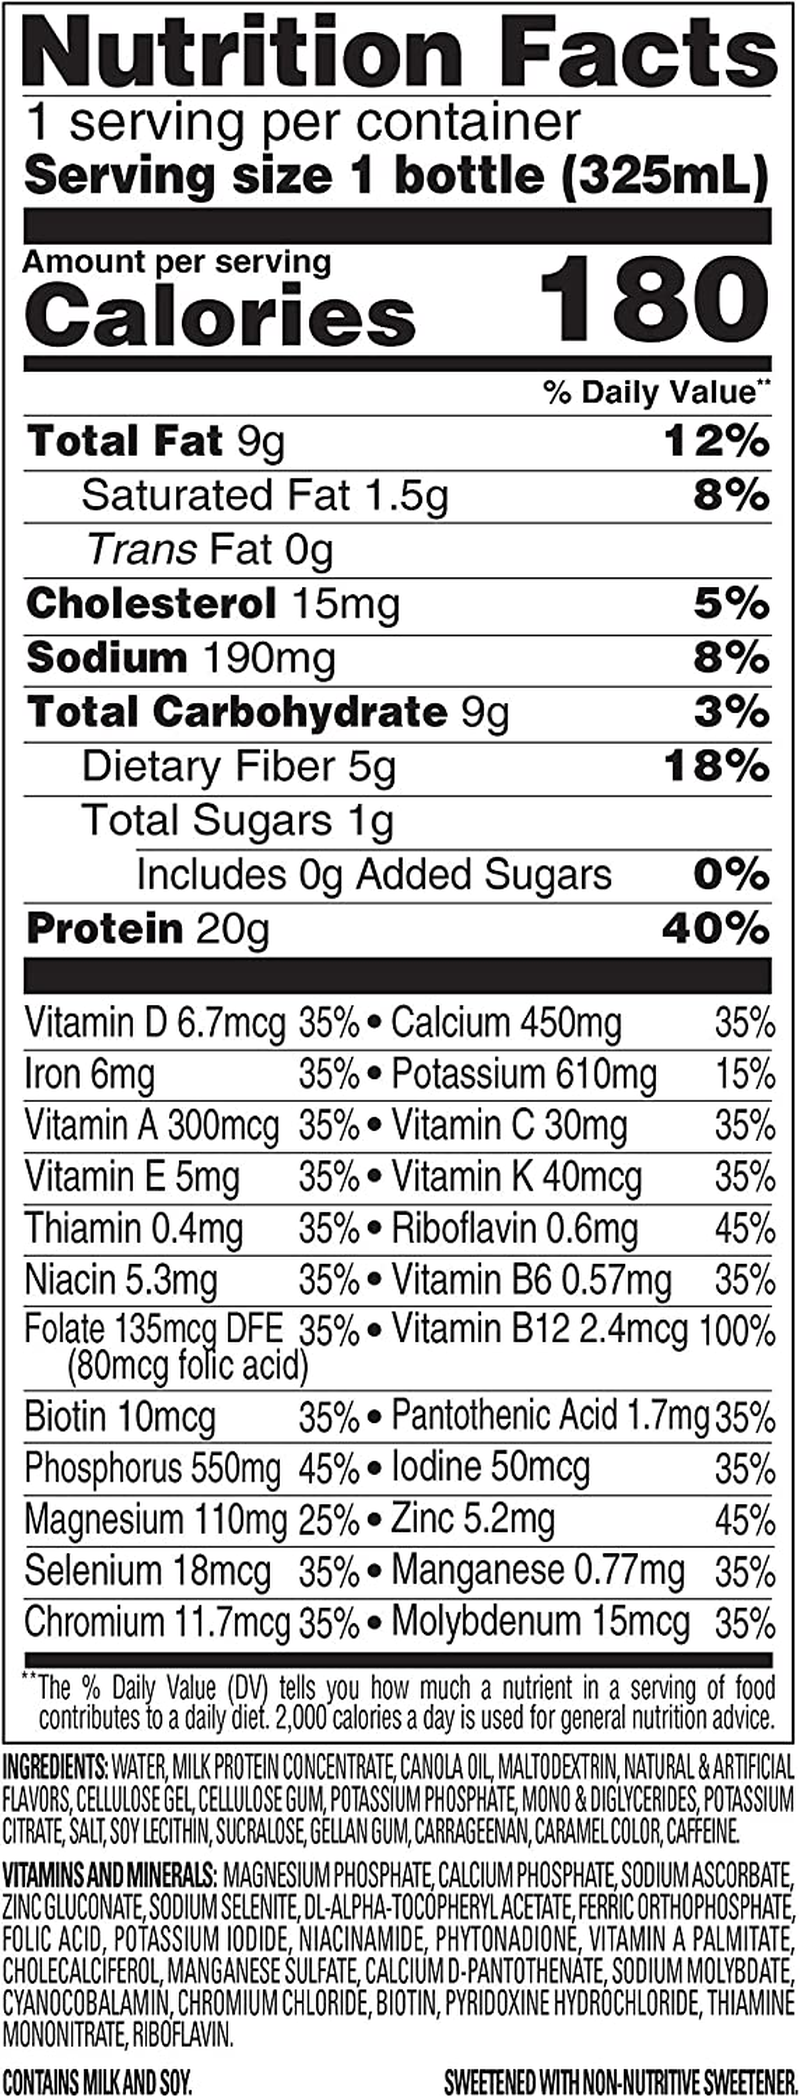 Slimfast Advanced Energy High Protein Meal Replacement Shake, Caramel Latte, 20G of Ready to Drink Protein with Caffeine, 11 Fl. Oz Bottle, 4 Count (Pack of 3)